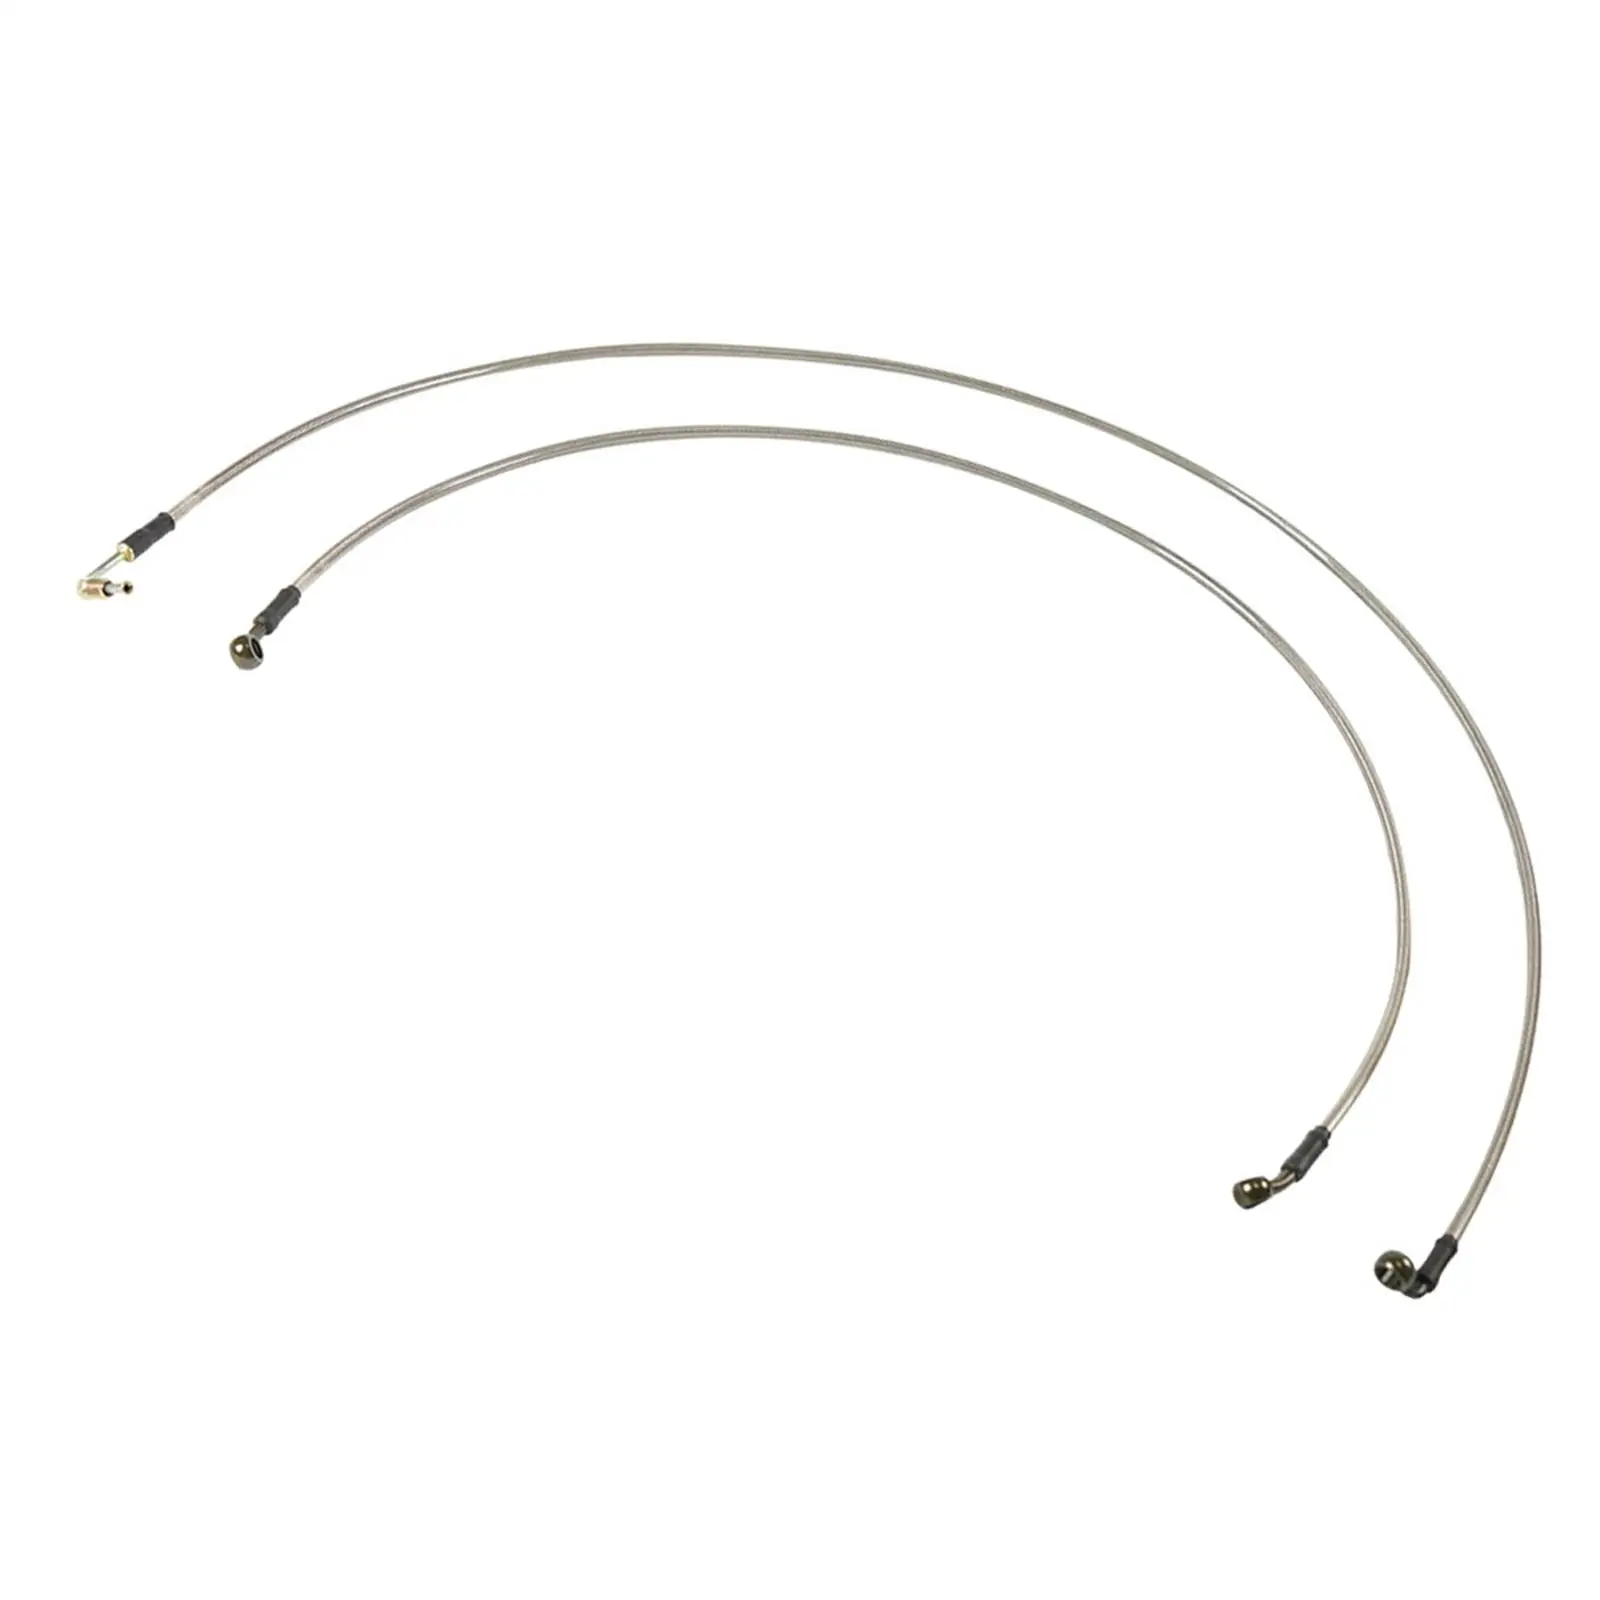 Replacement Parts for Stainless Steel Braided , Suitable for